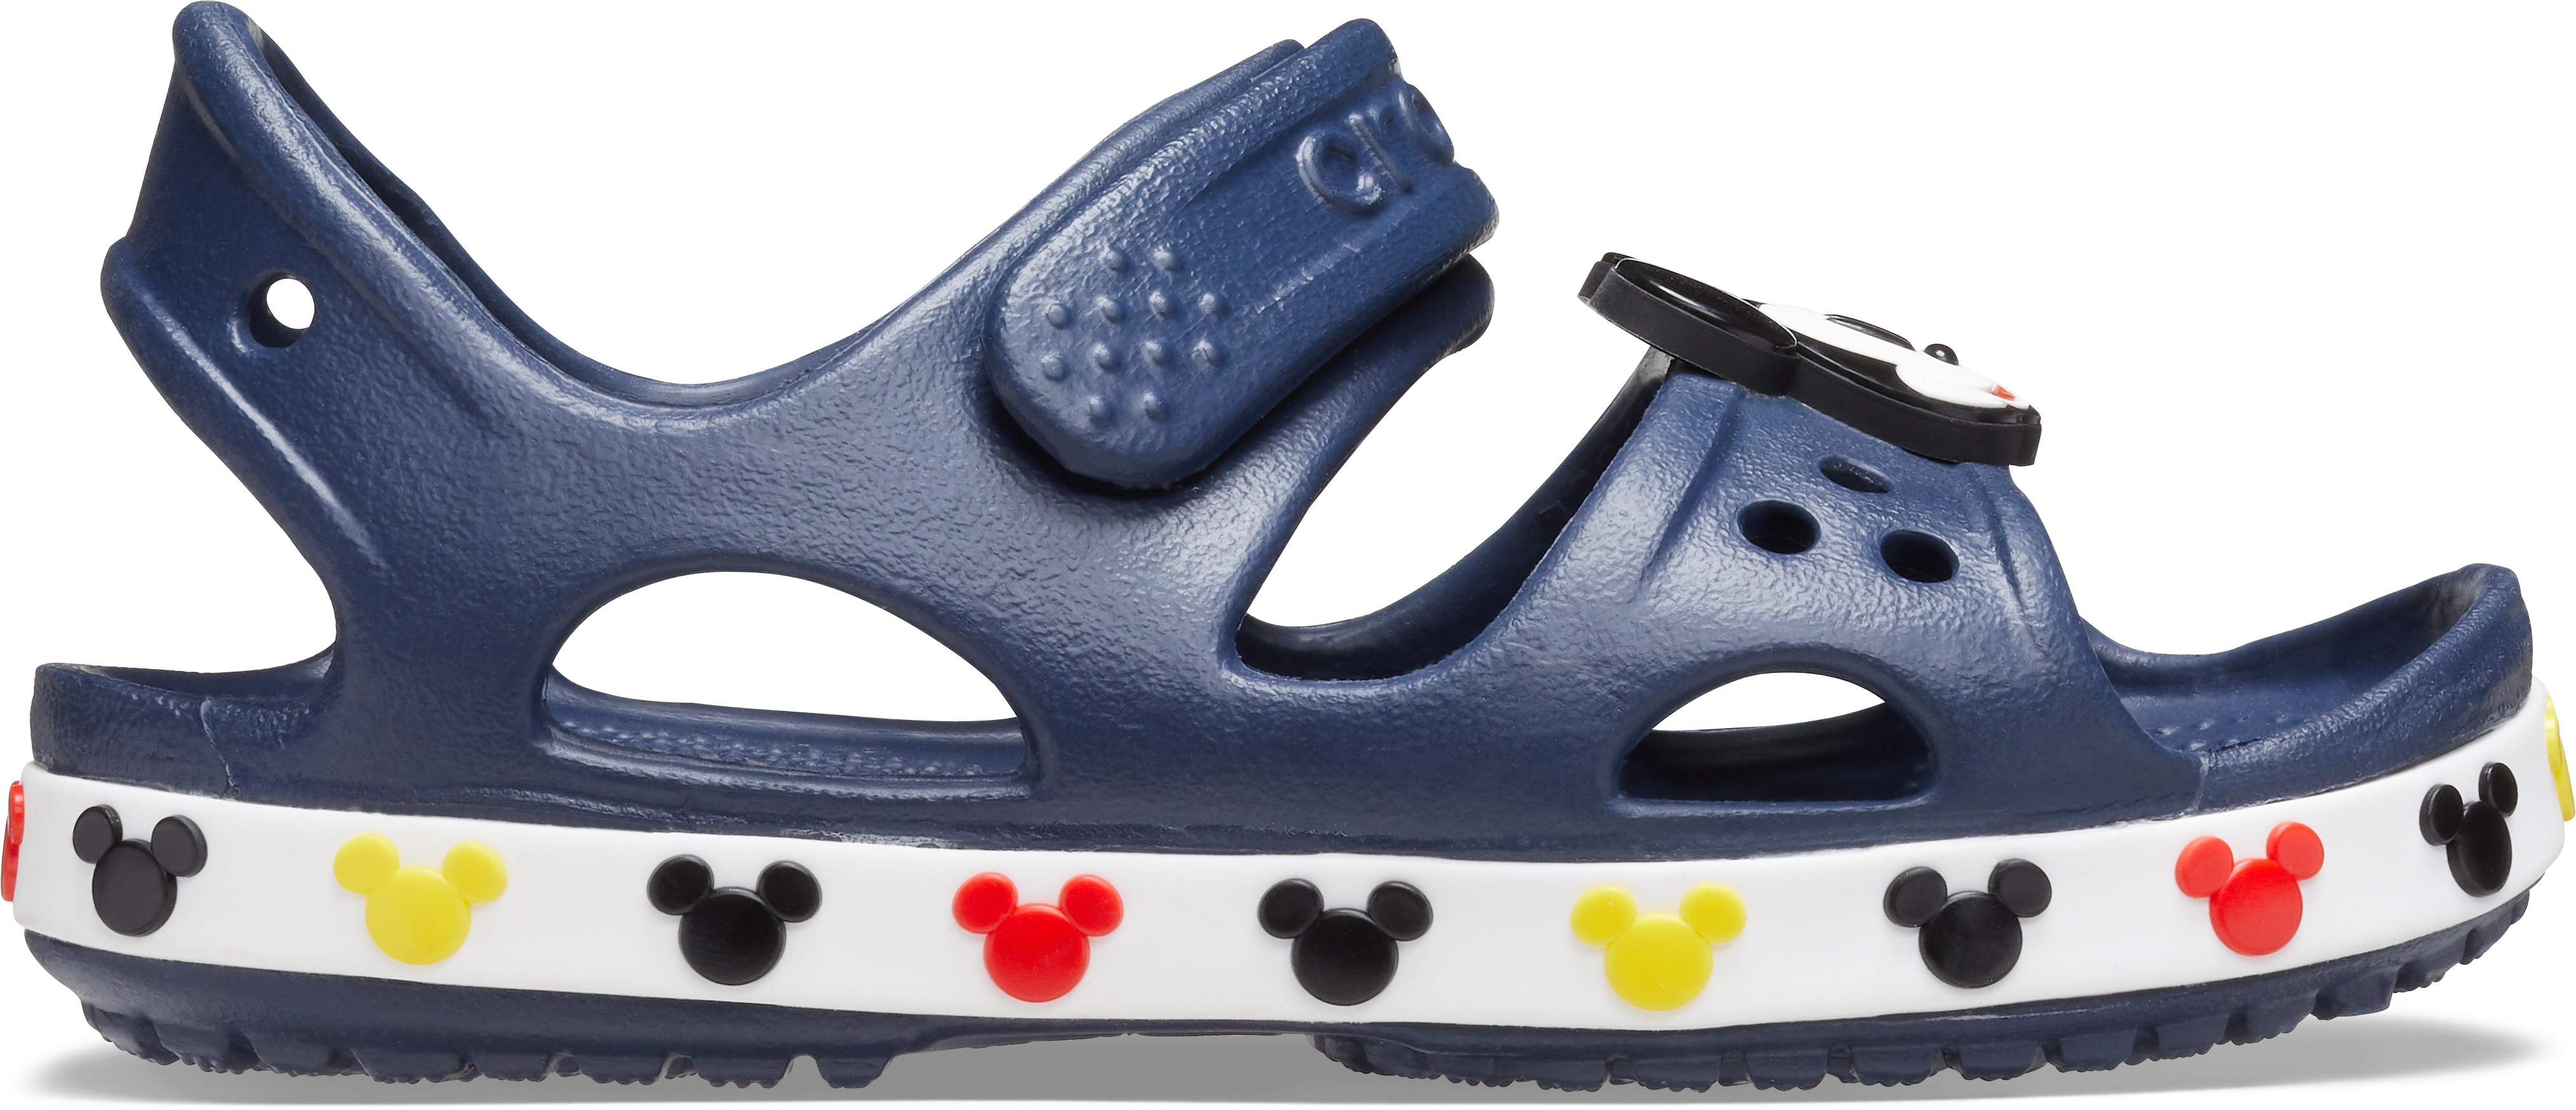 mickey mouse croc sandals